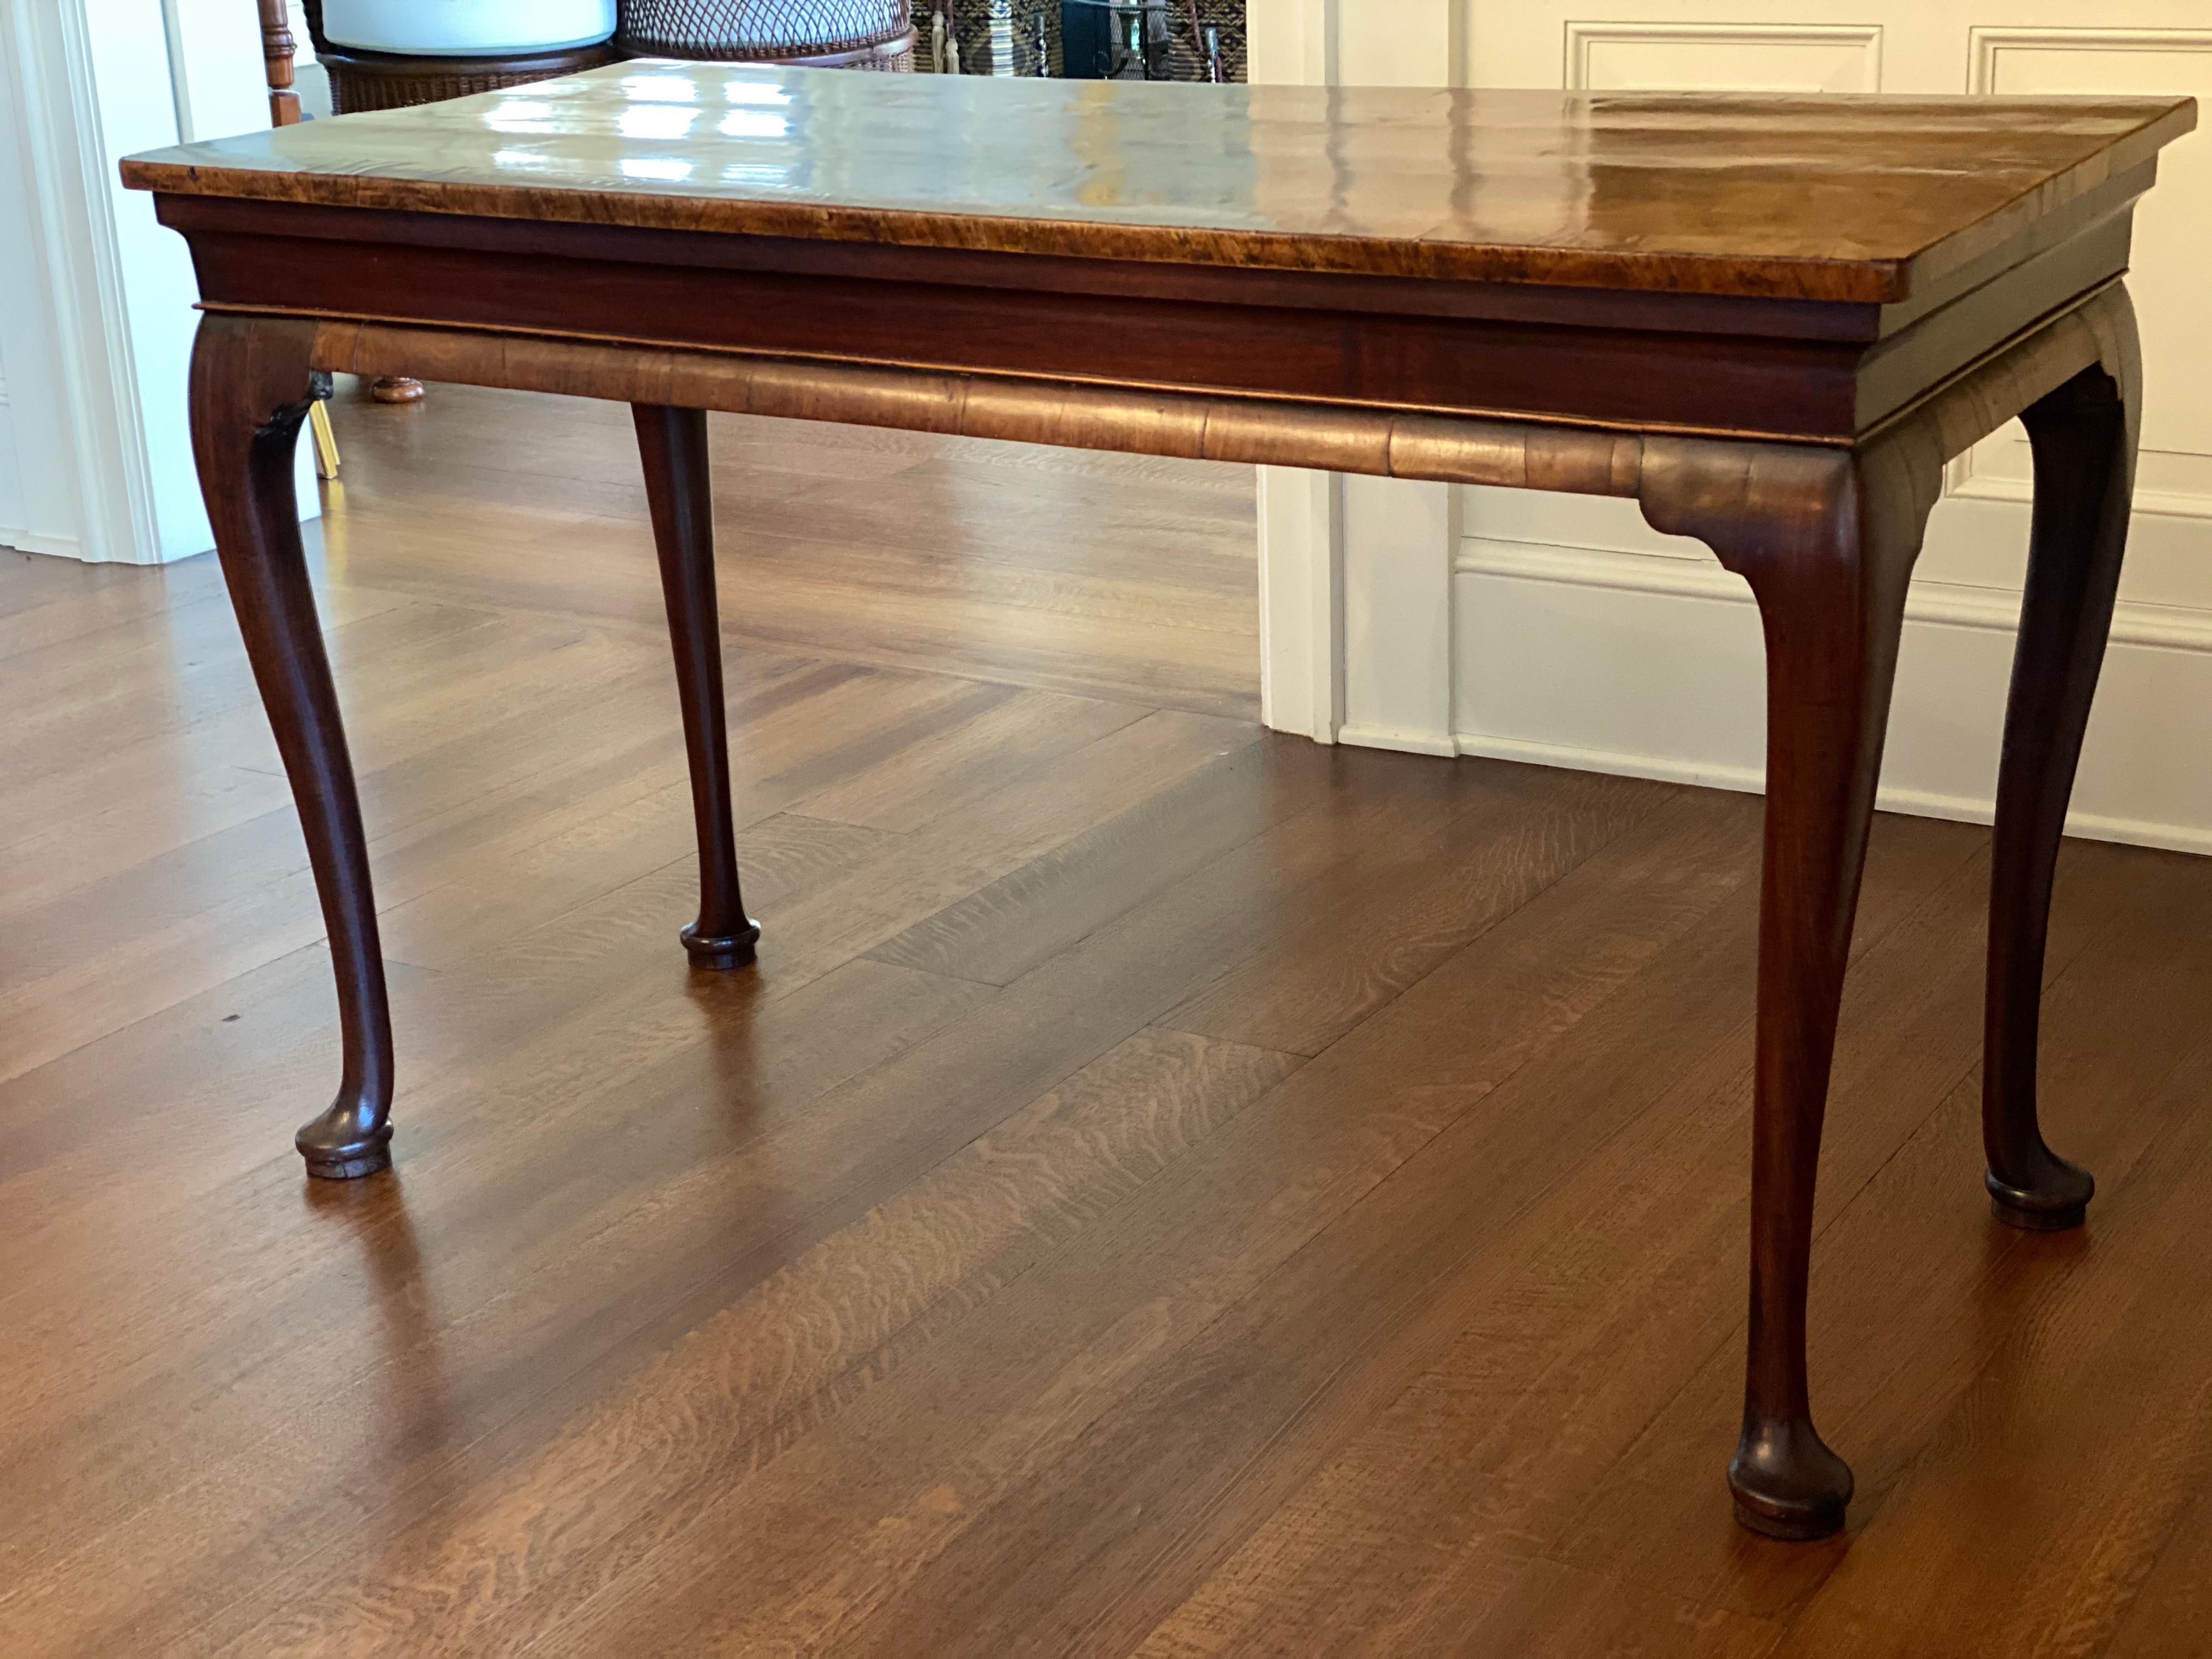 George II walnut pier table, 18th century
The later quarter-veneered top above a conforming frieze raised on cabriole legs ending in pad feet.
Measures: 23